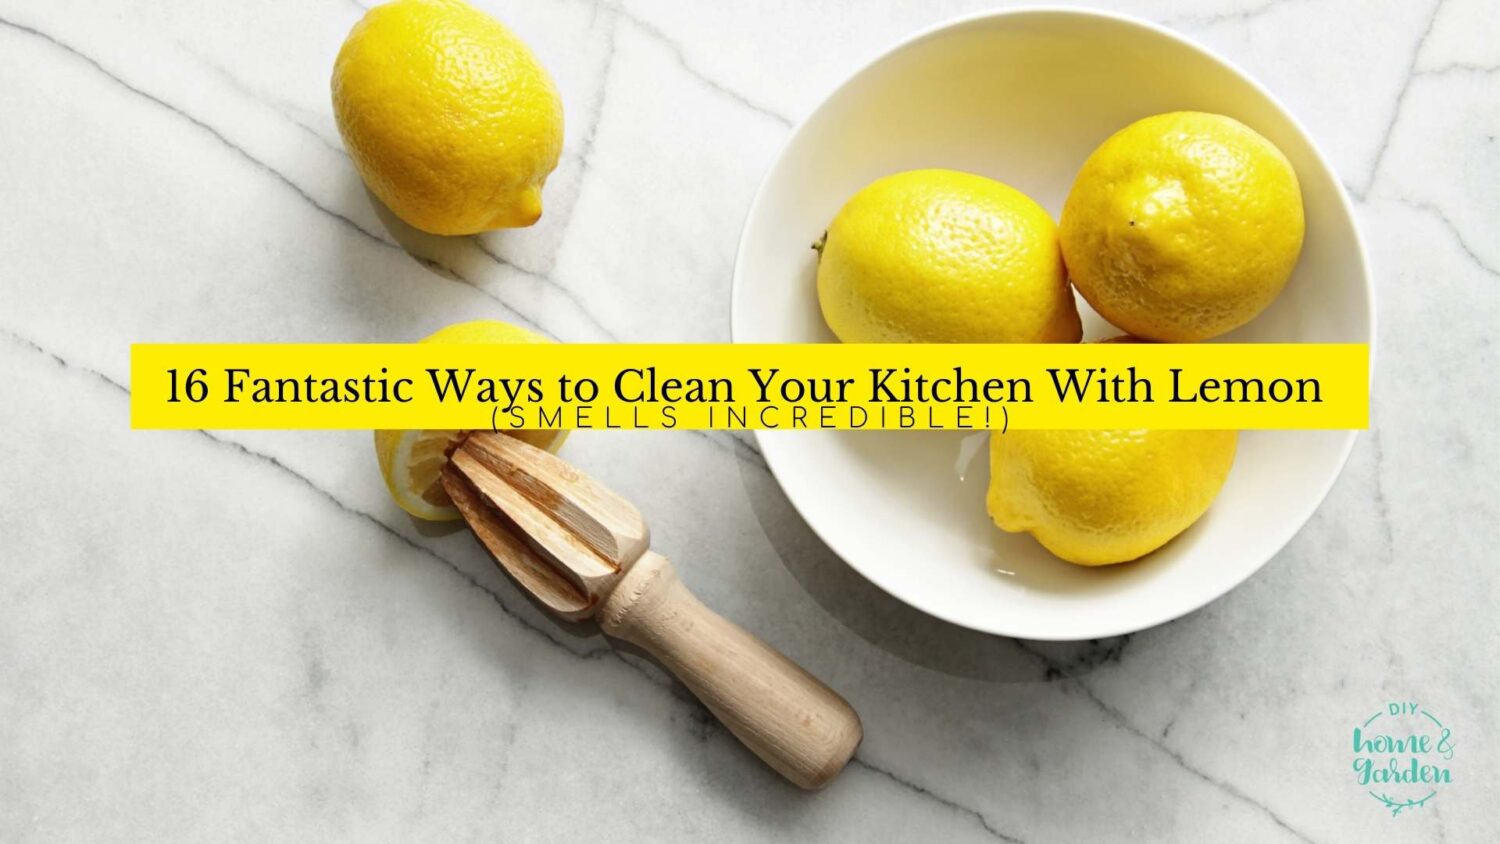 16 Fantastic Ways to Clean Your Kitchen With Lemon (Smells Incredible!)